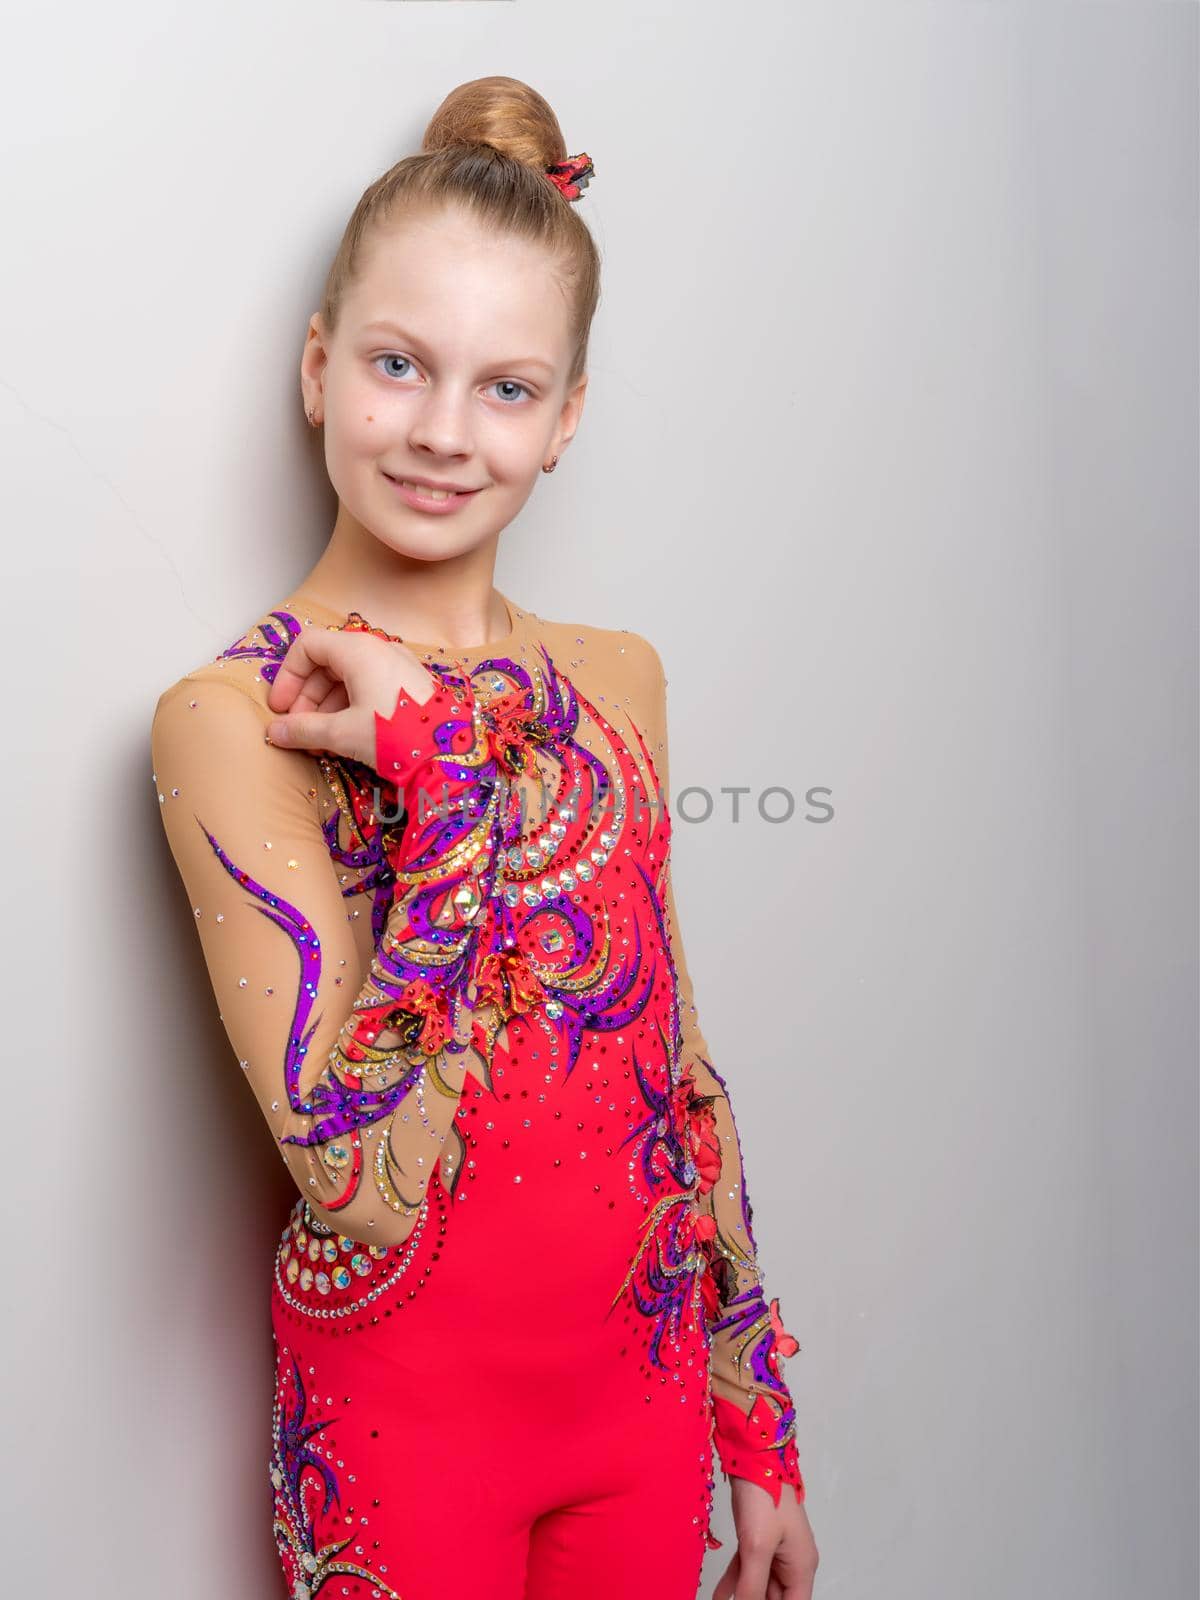 Little girl gymnast in a beautiful suit for competitions, posing in the studio near the wall. The concept of youth sports fashion, healthy lifestyle.